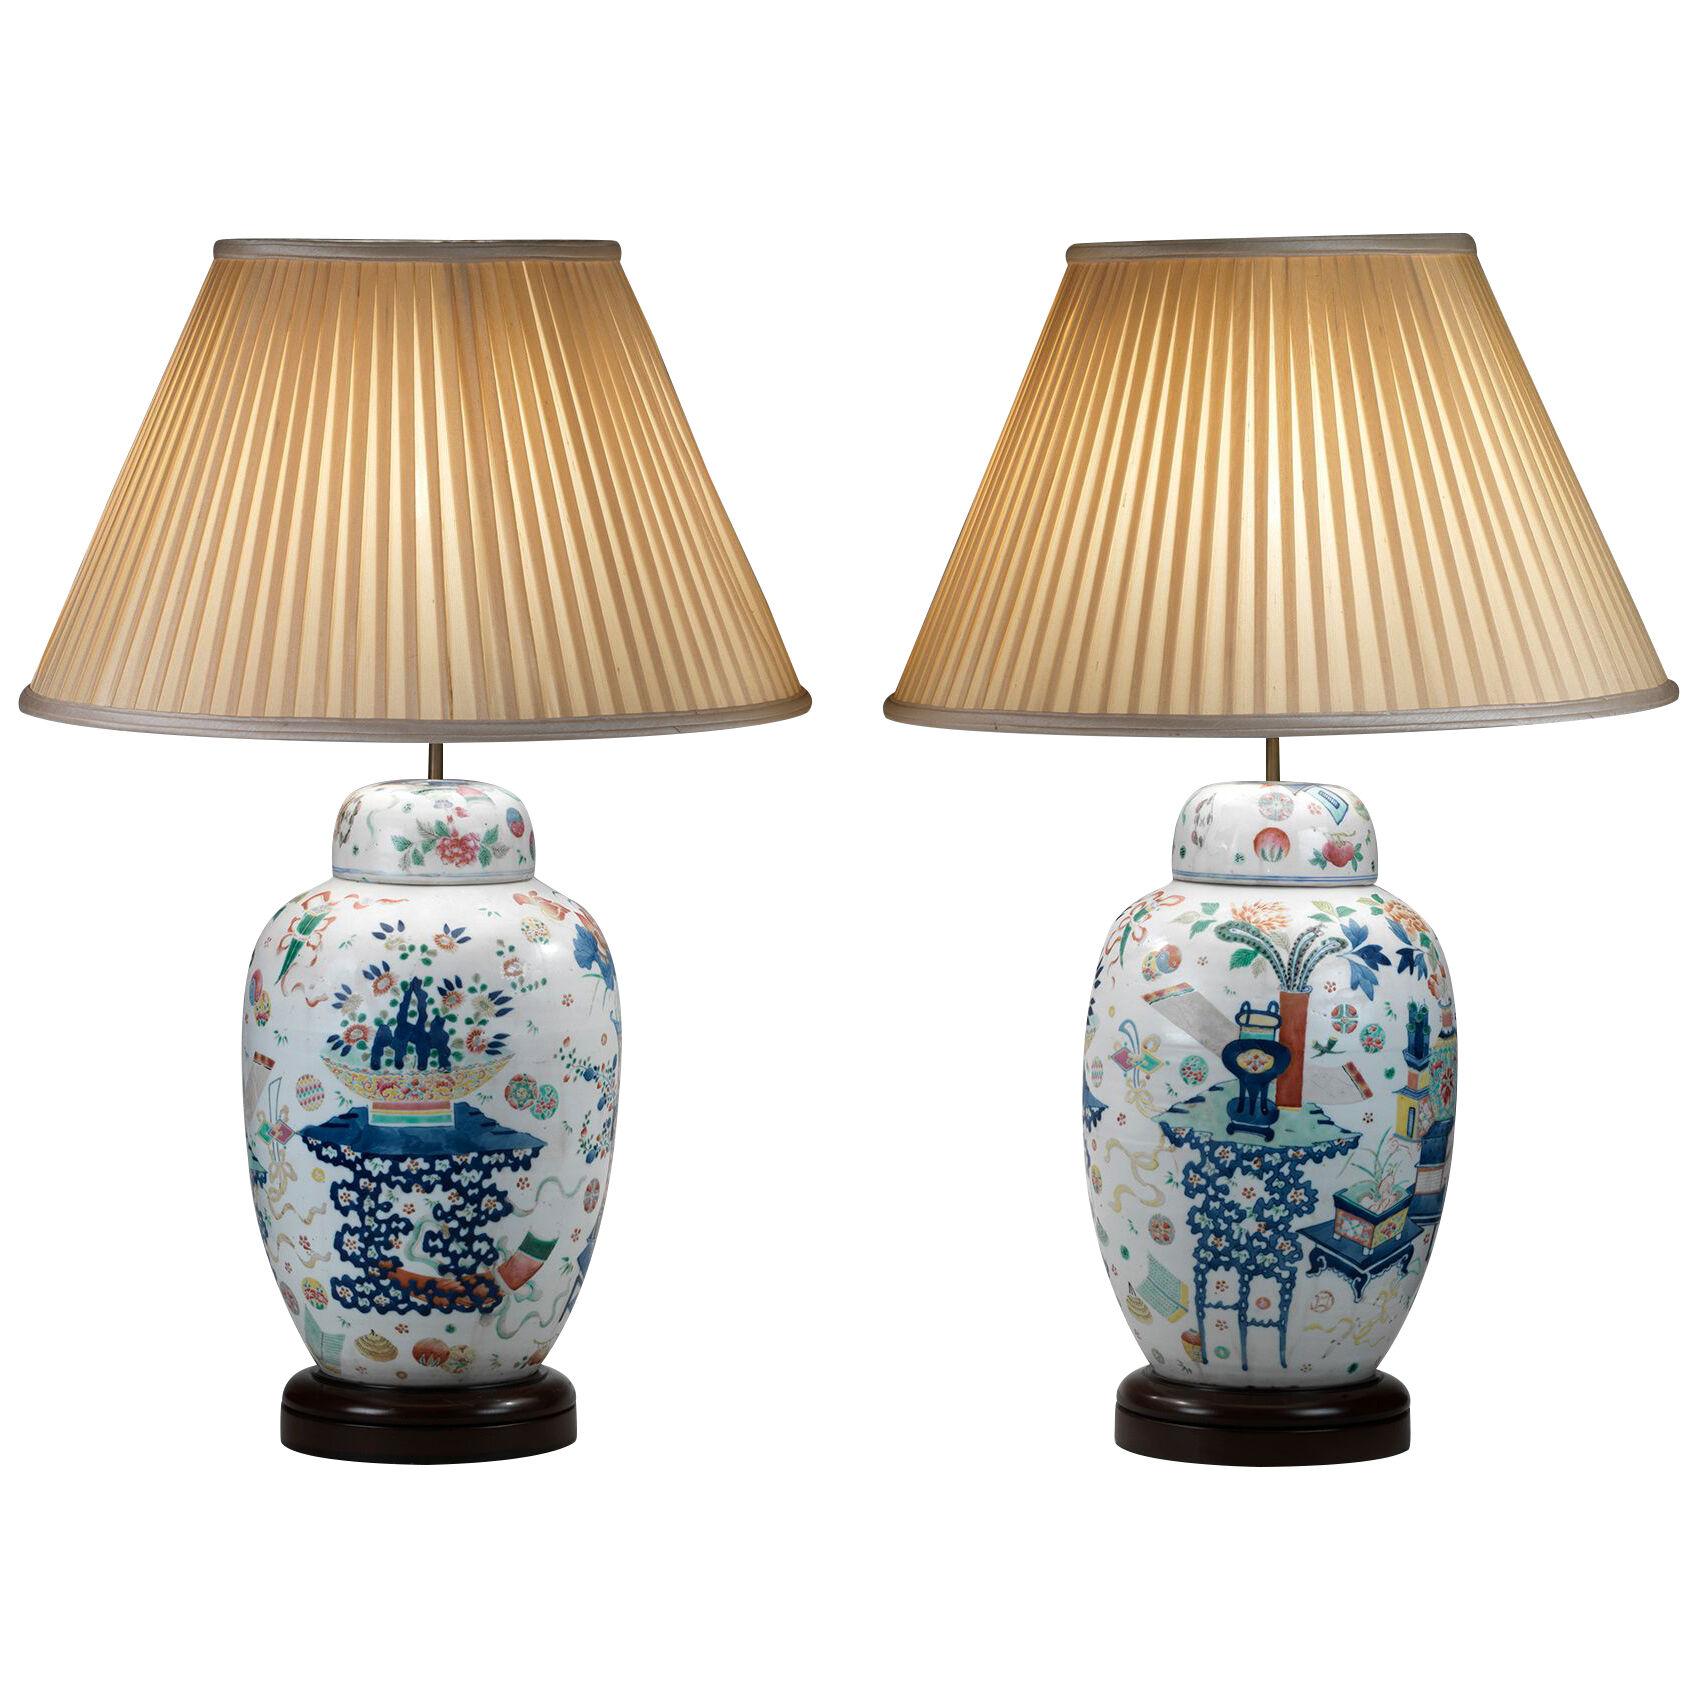 Pair of Nineteenth Century oriental jars converted into table lamps